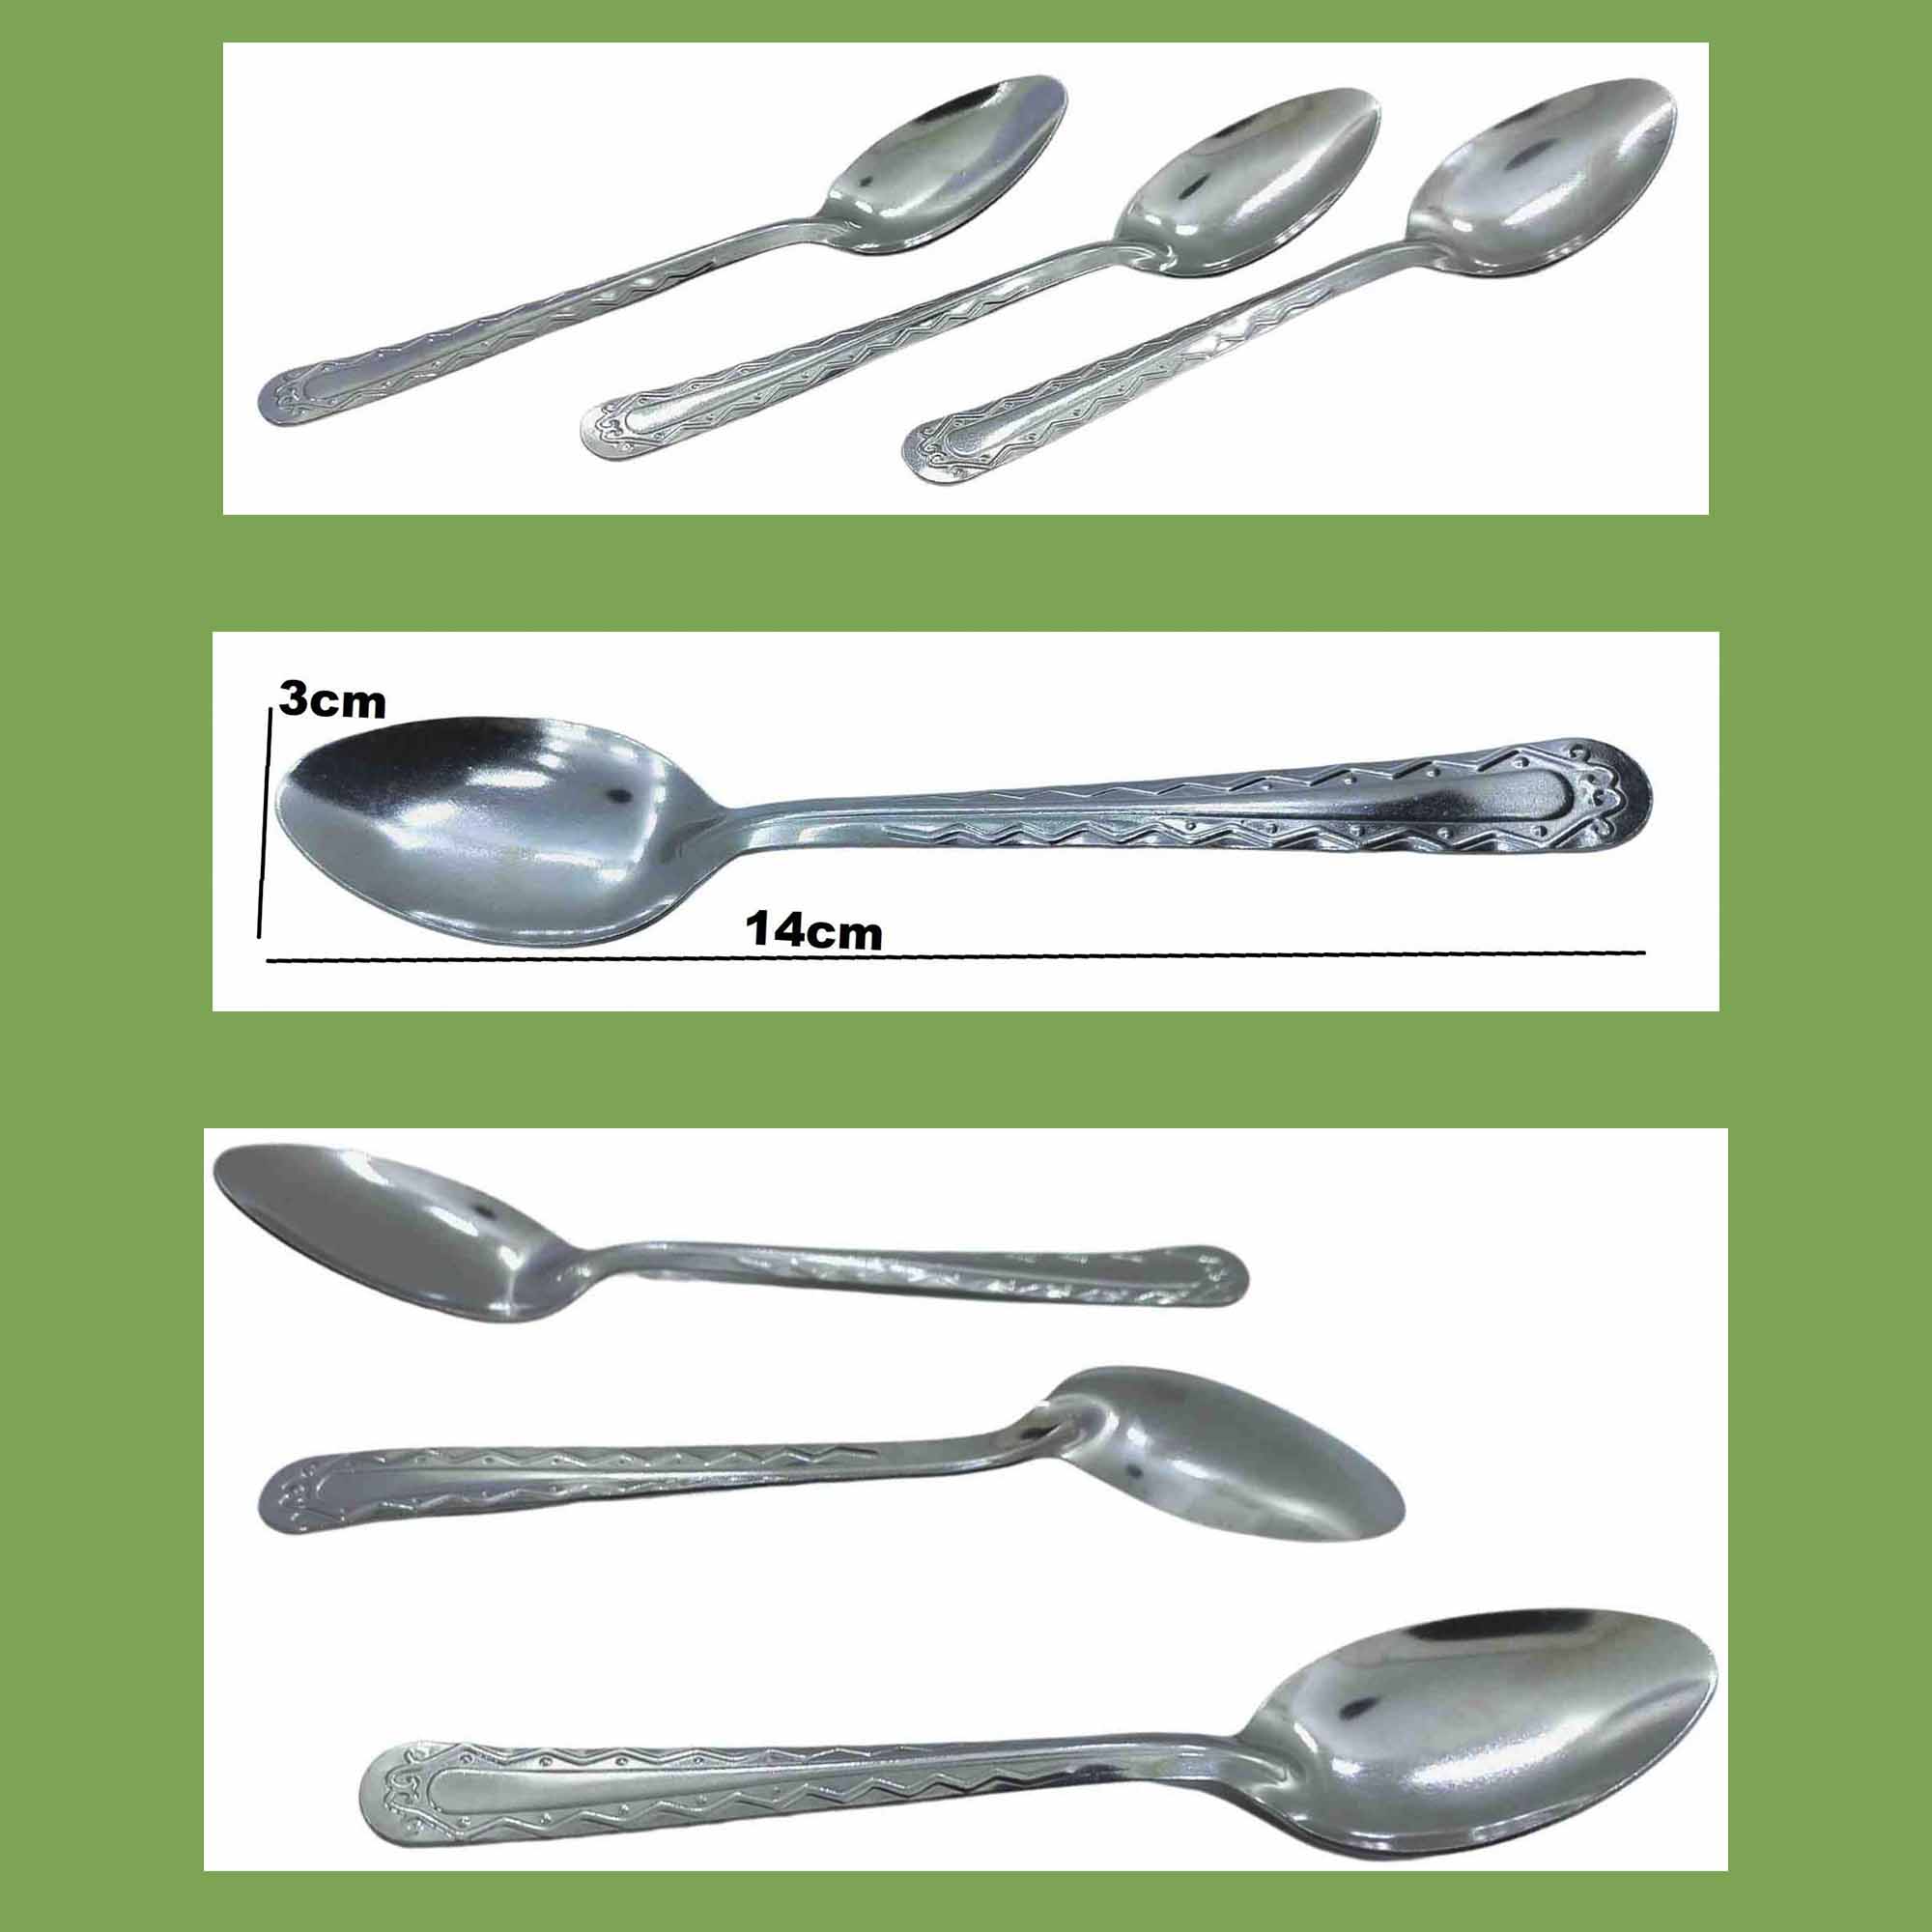 tea Spoons Made of Stainless Steel - Stylish Cutlery